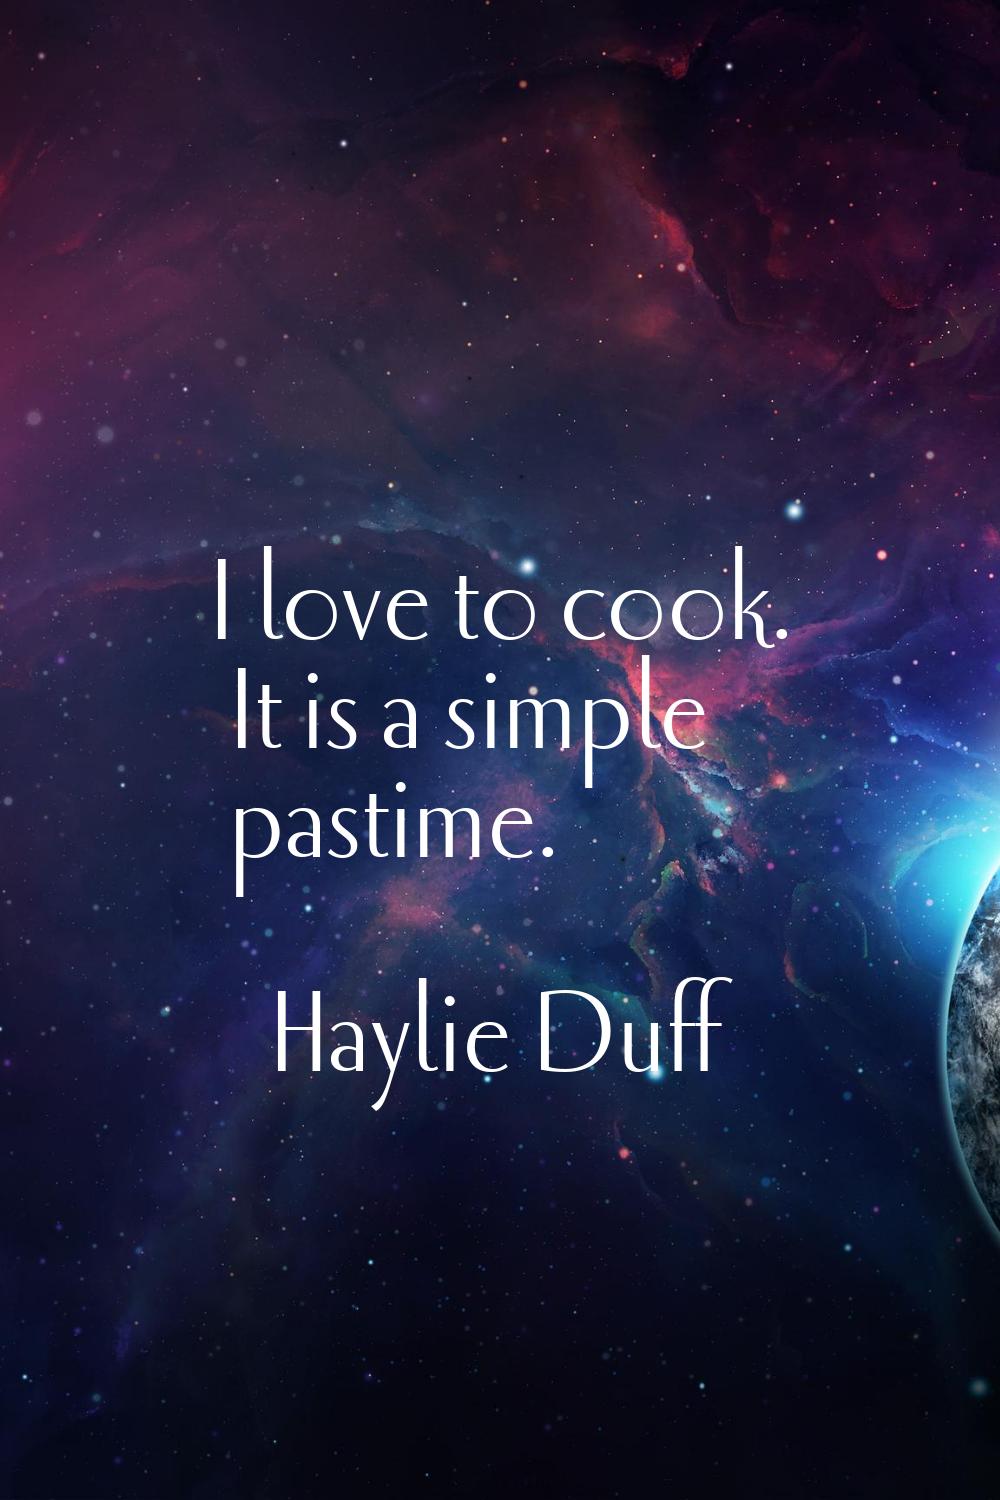 I love to cook. It is a simple pastime.